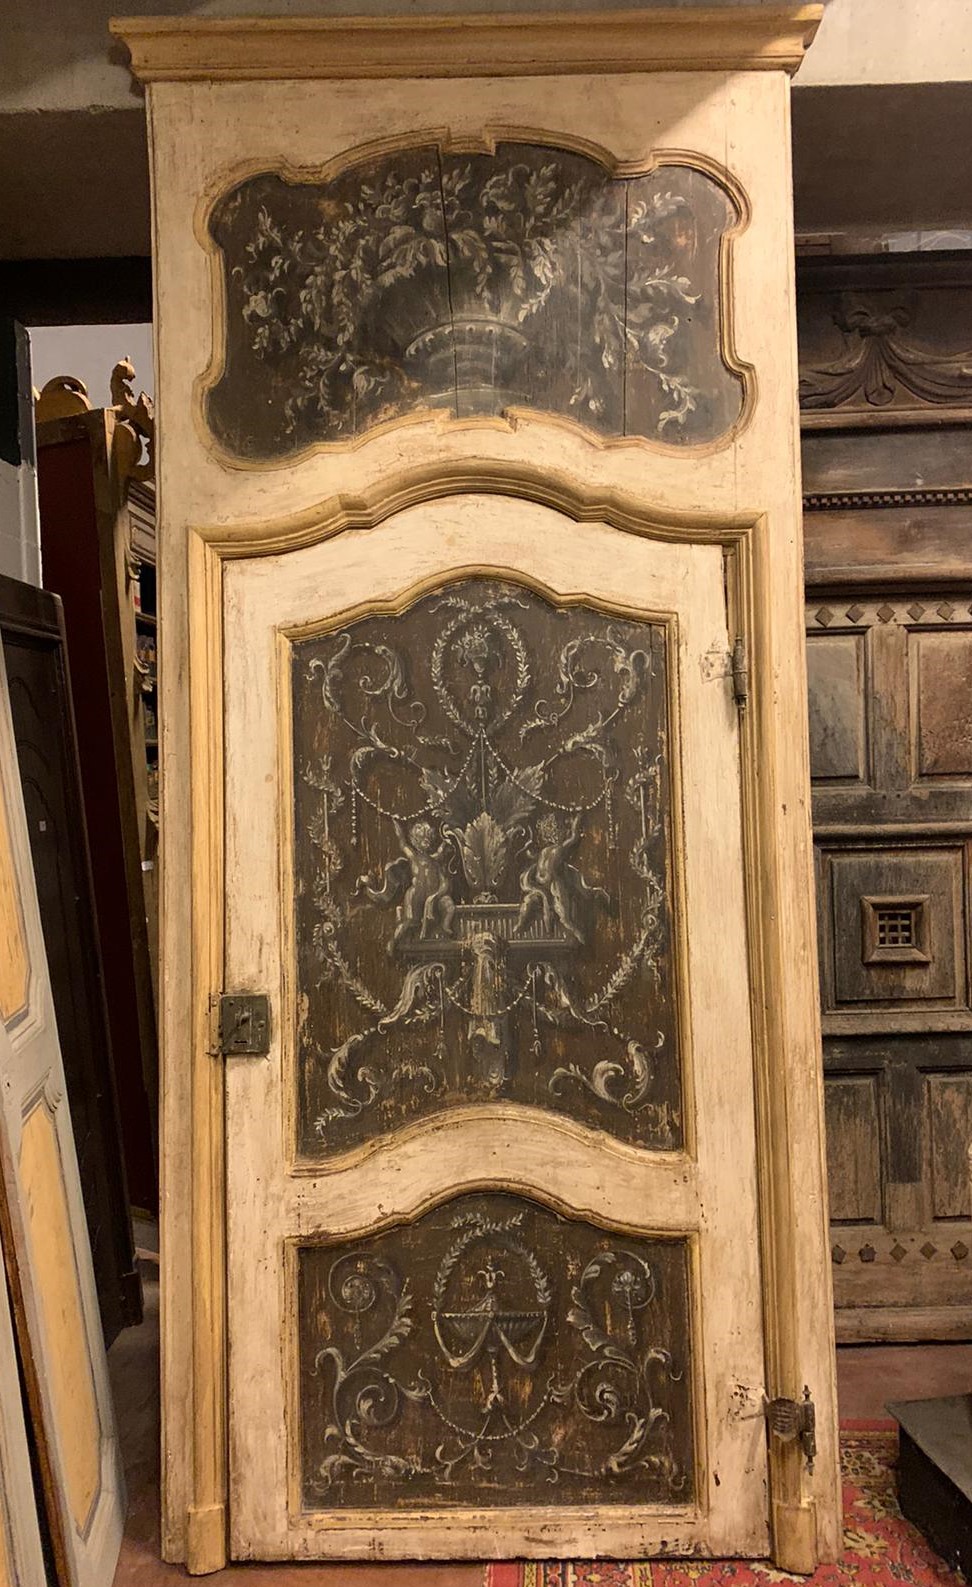 A ptl561 - single-leaf door complete with frame, 18th century, cm w 136 x h 312